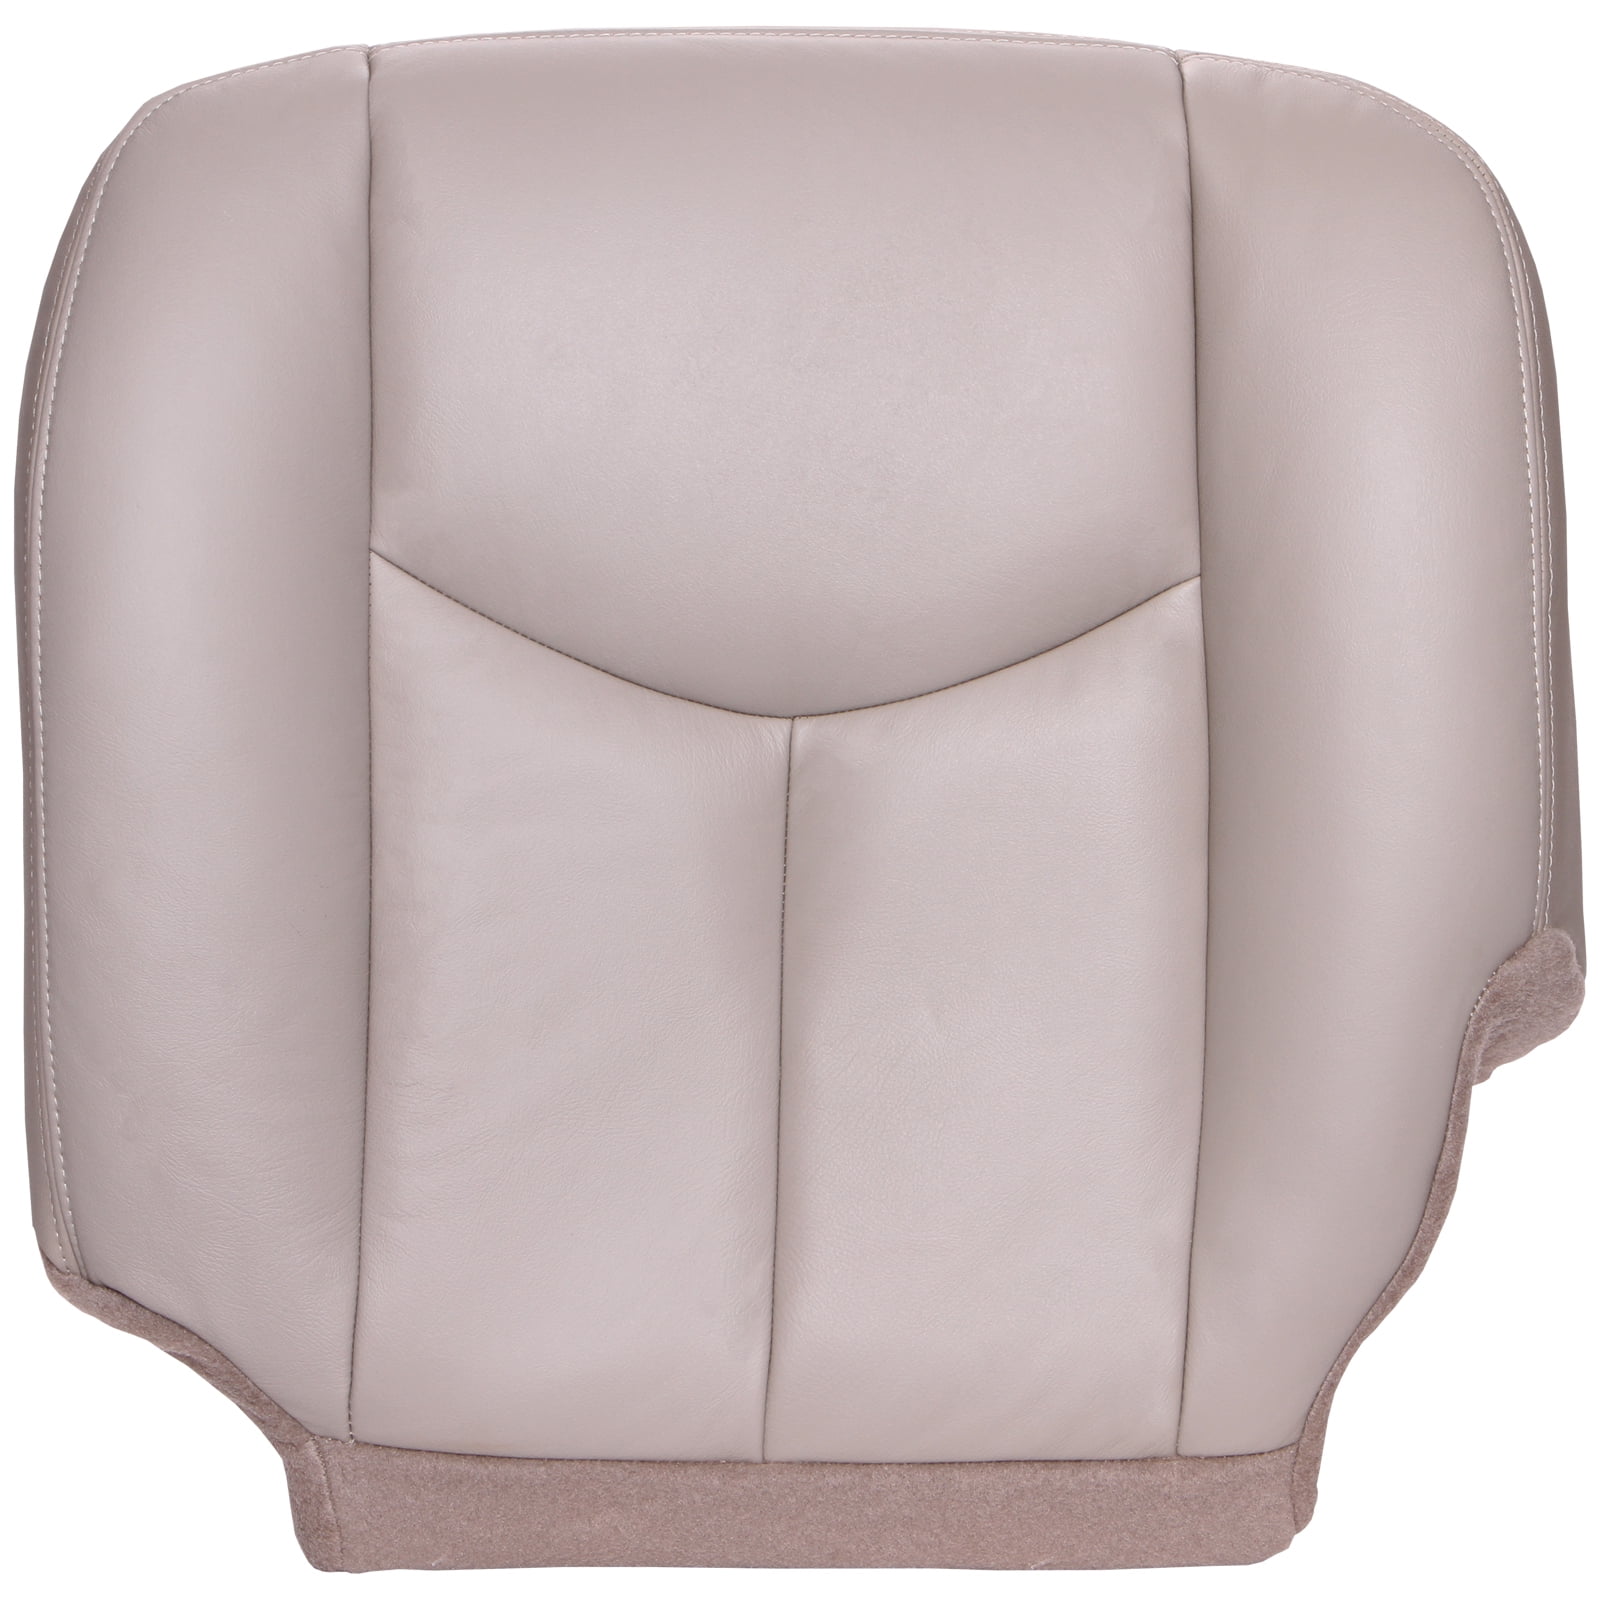 Durafit Seat Covers Suburban and GMC Yukon Front Captain Chairs with Side Impact Airbags and Drivers Electric Controls. C2211 Beige Leatherette Seat Covers for 2003-2007 Chevy Tahoe 